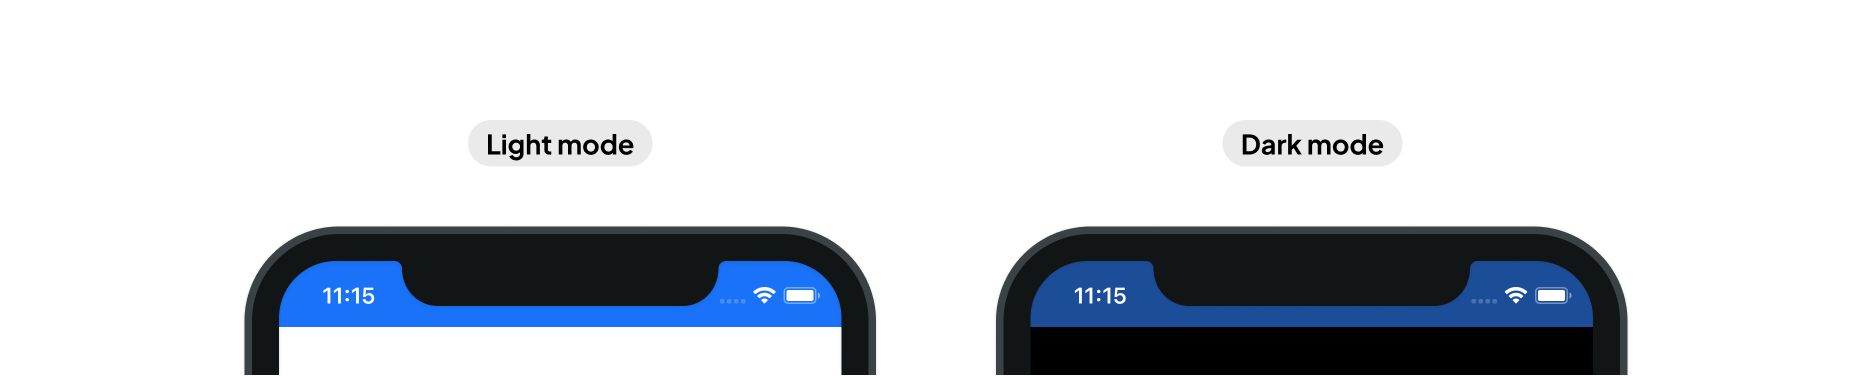 Example of the statusbar background color in light and dark mode